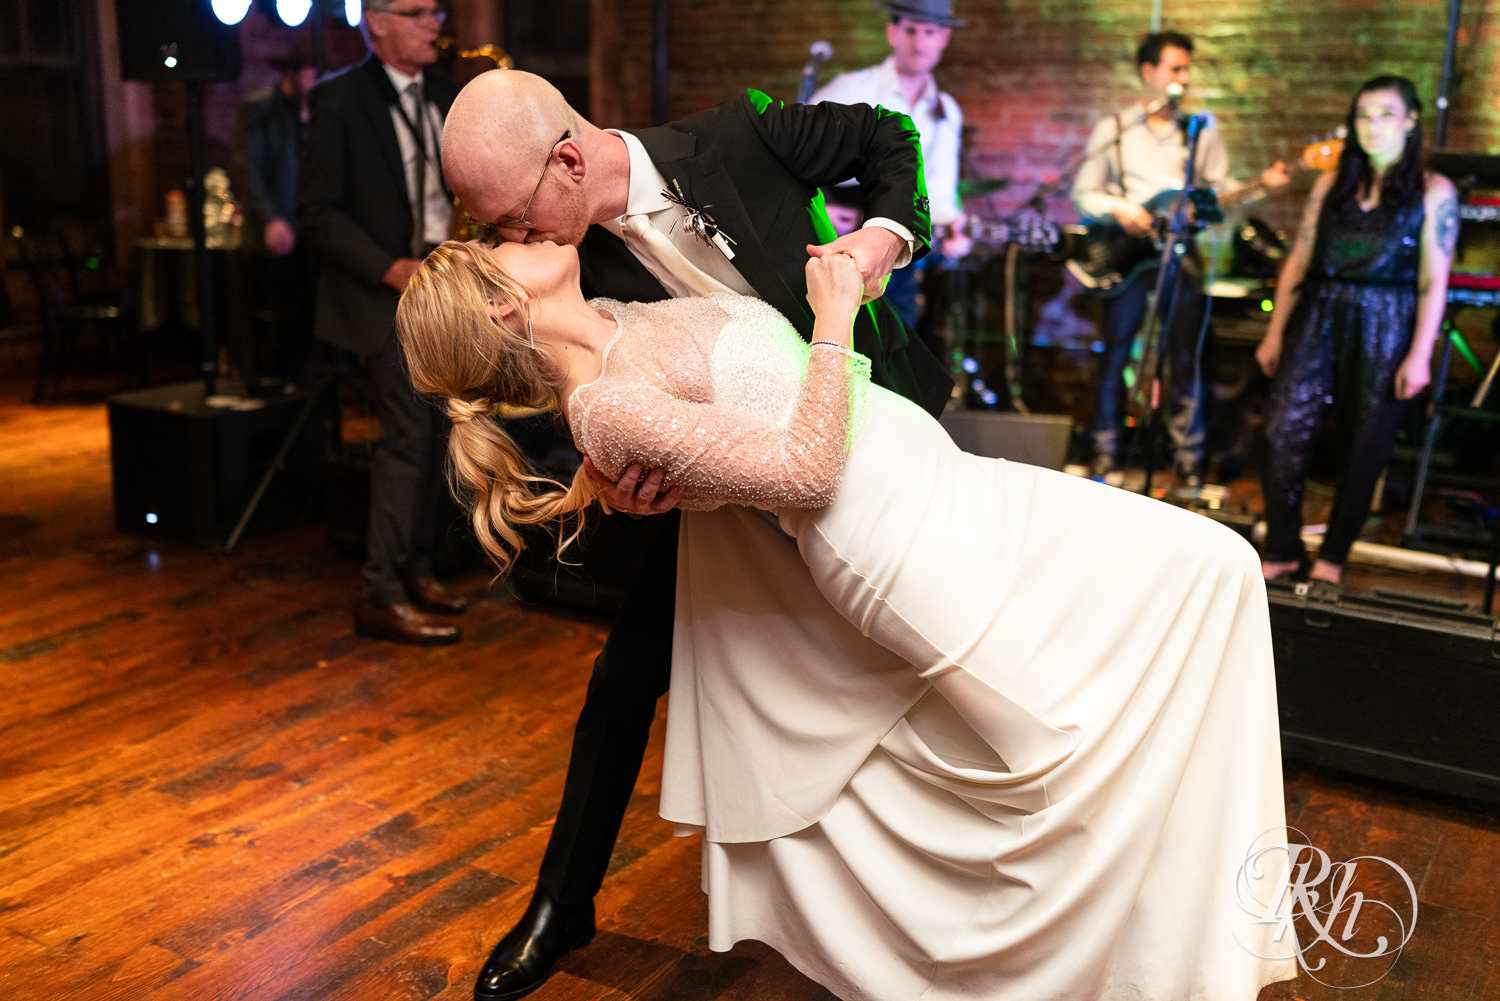 Bride and groom have first dance during wedding reception at Gatherings at Station 10 in Saint Paul, Minnesota.